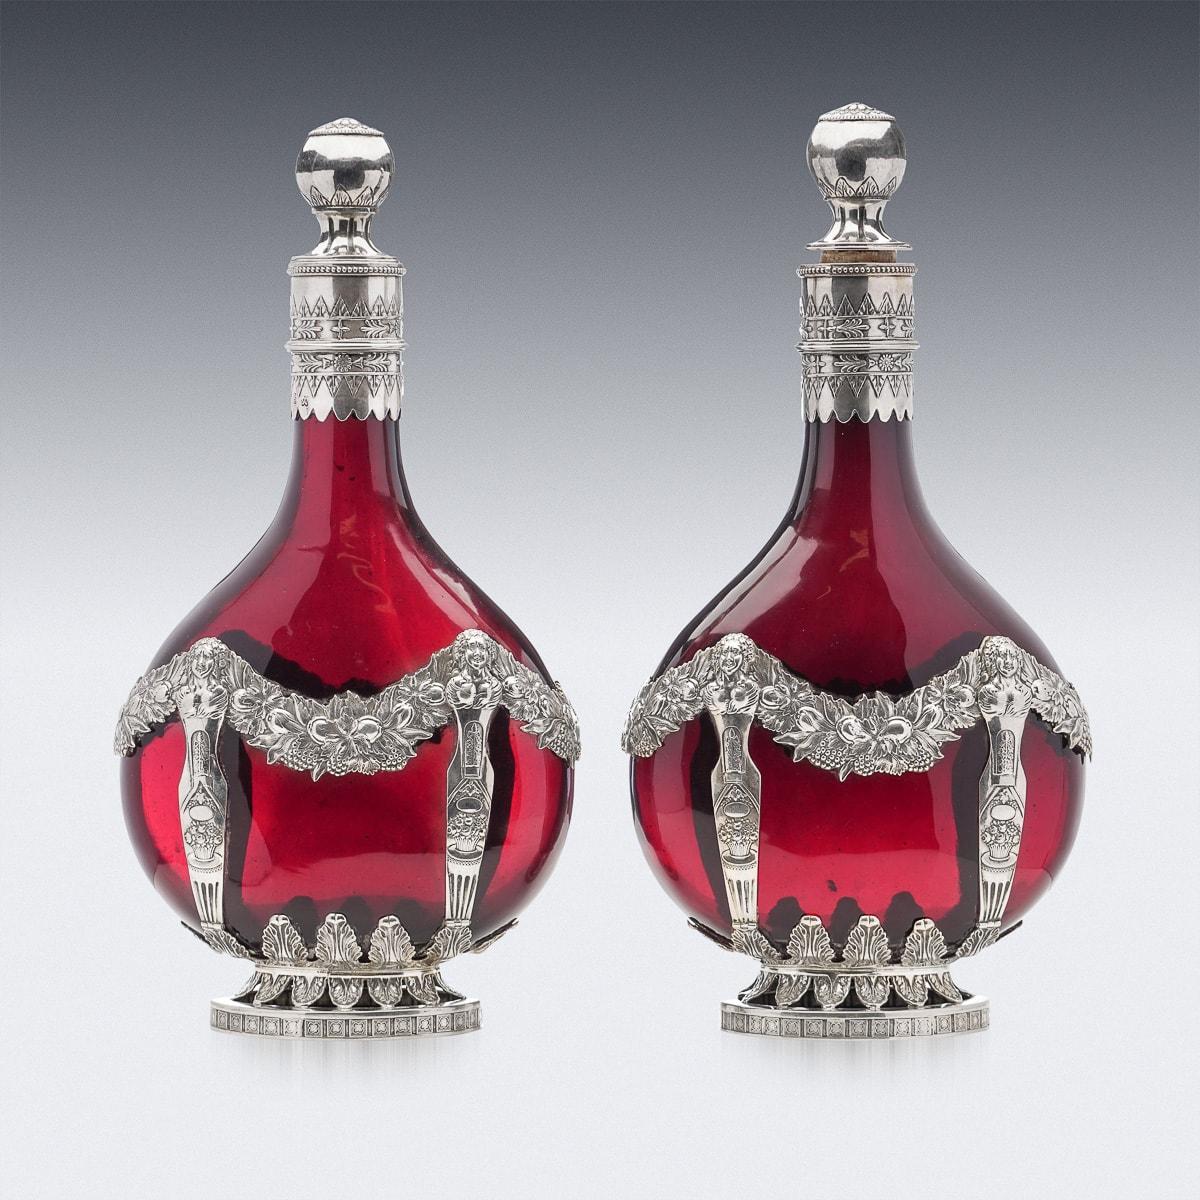 Antique late 19th Century German pair of ruby red decanters, beautifully applied with silver floral bands, surmounted by two ball shaped stoppers. Hallmarked German silver (800 standard), Makers mark ‘KKK’ for Karl Kurz.

CONDITION
In Great